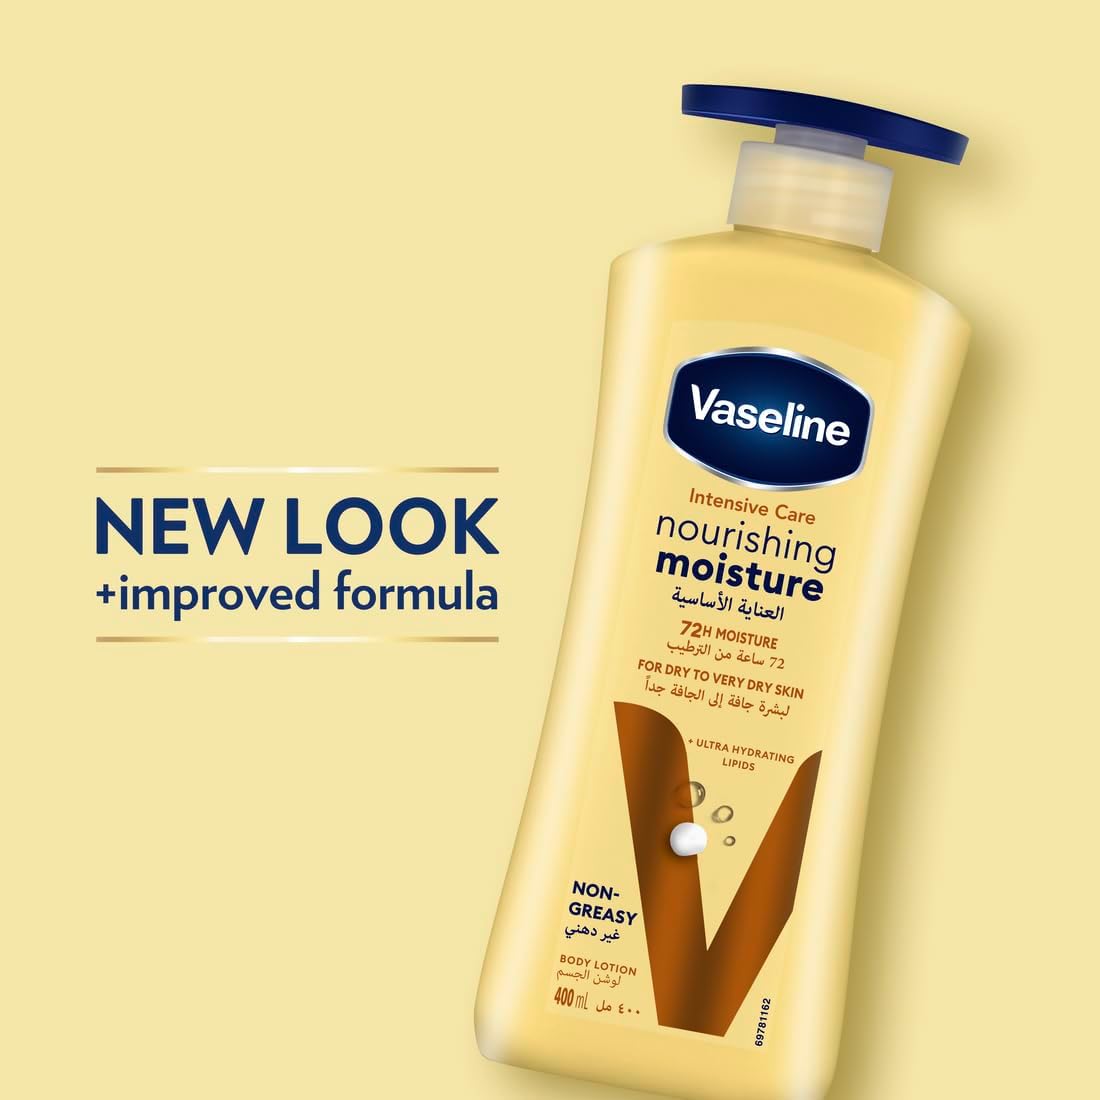 Vaseline Body Lotion Essential Healing With Pure Oat Extracts, Non-Greasy Formula, Heals Dry Skin,400ml